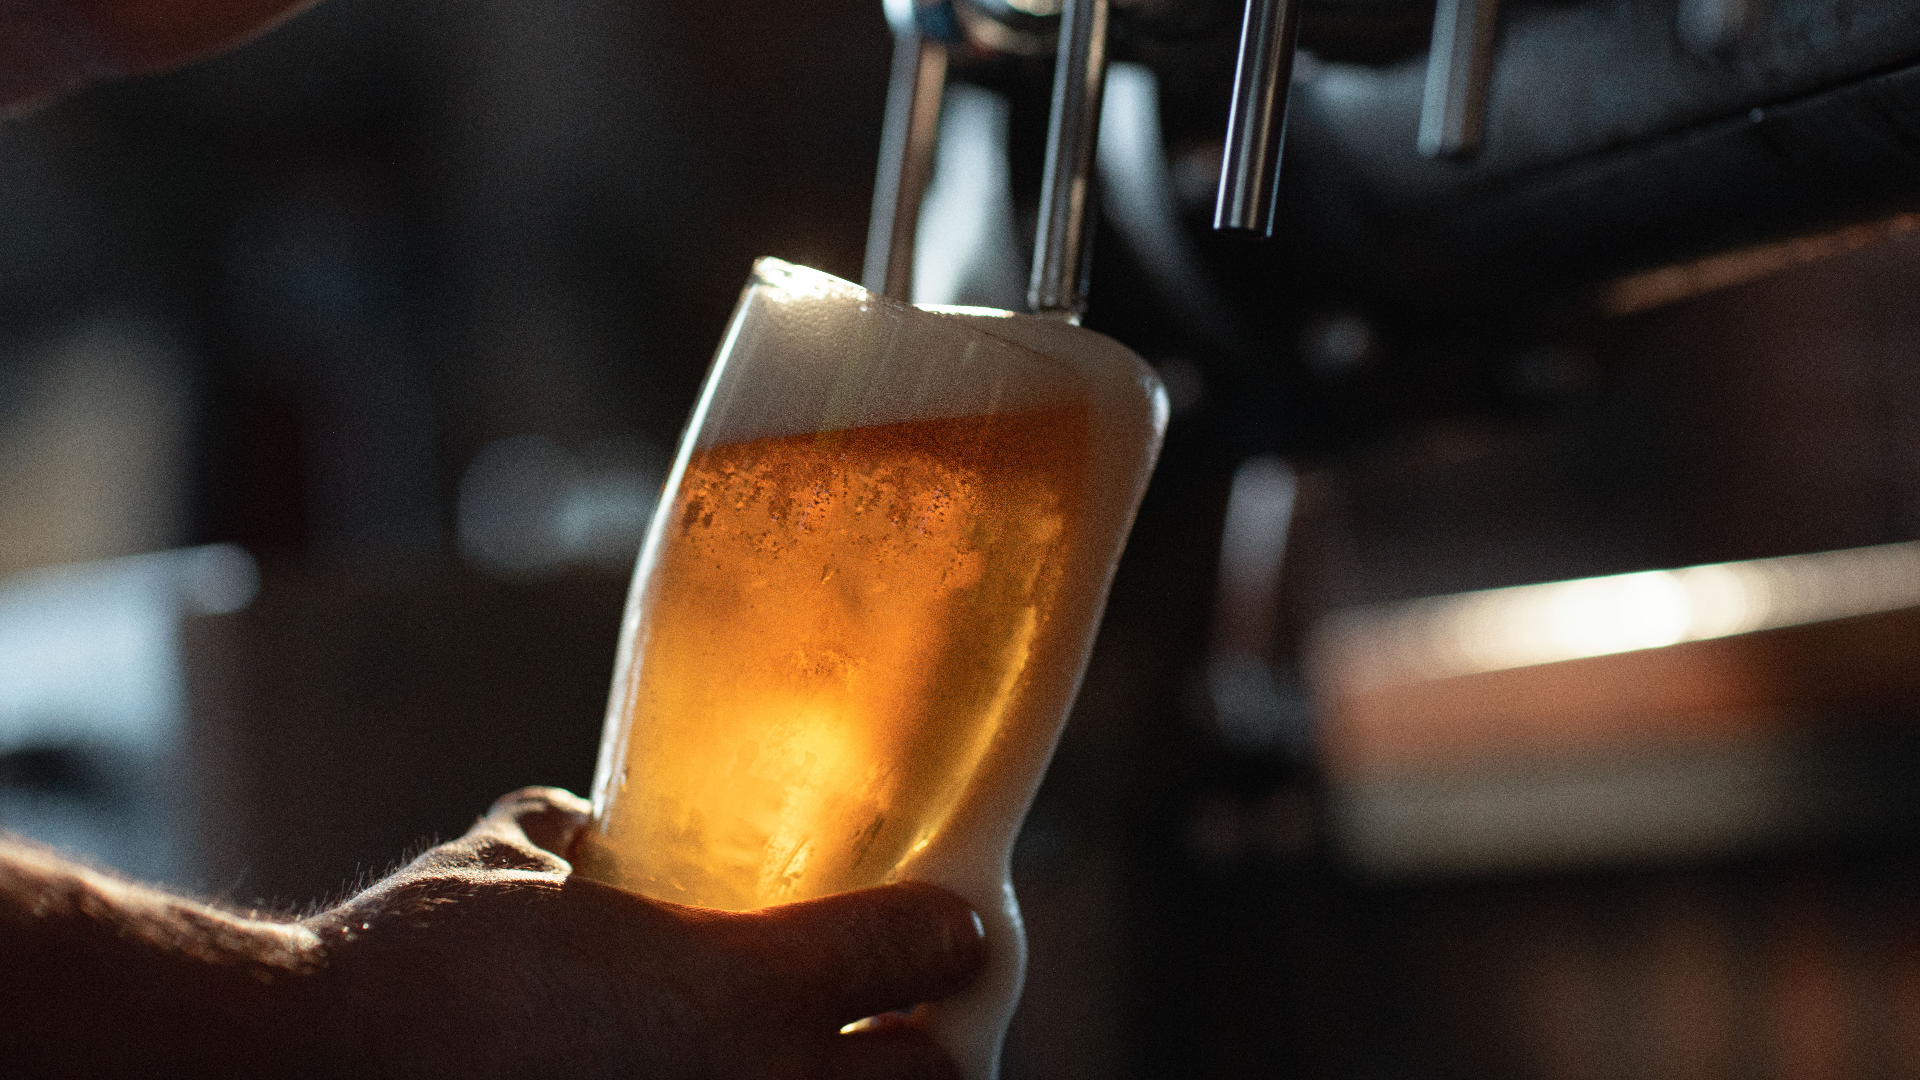 Supporters of the Tied Pubs (Scotland) Act say it will give consumers more choice in the pub.